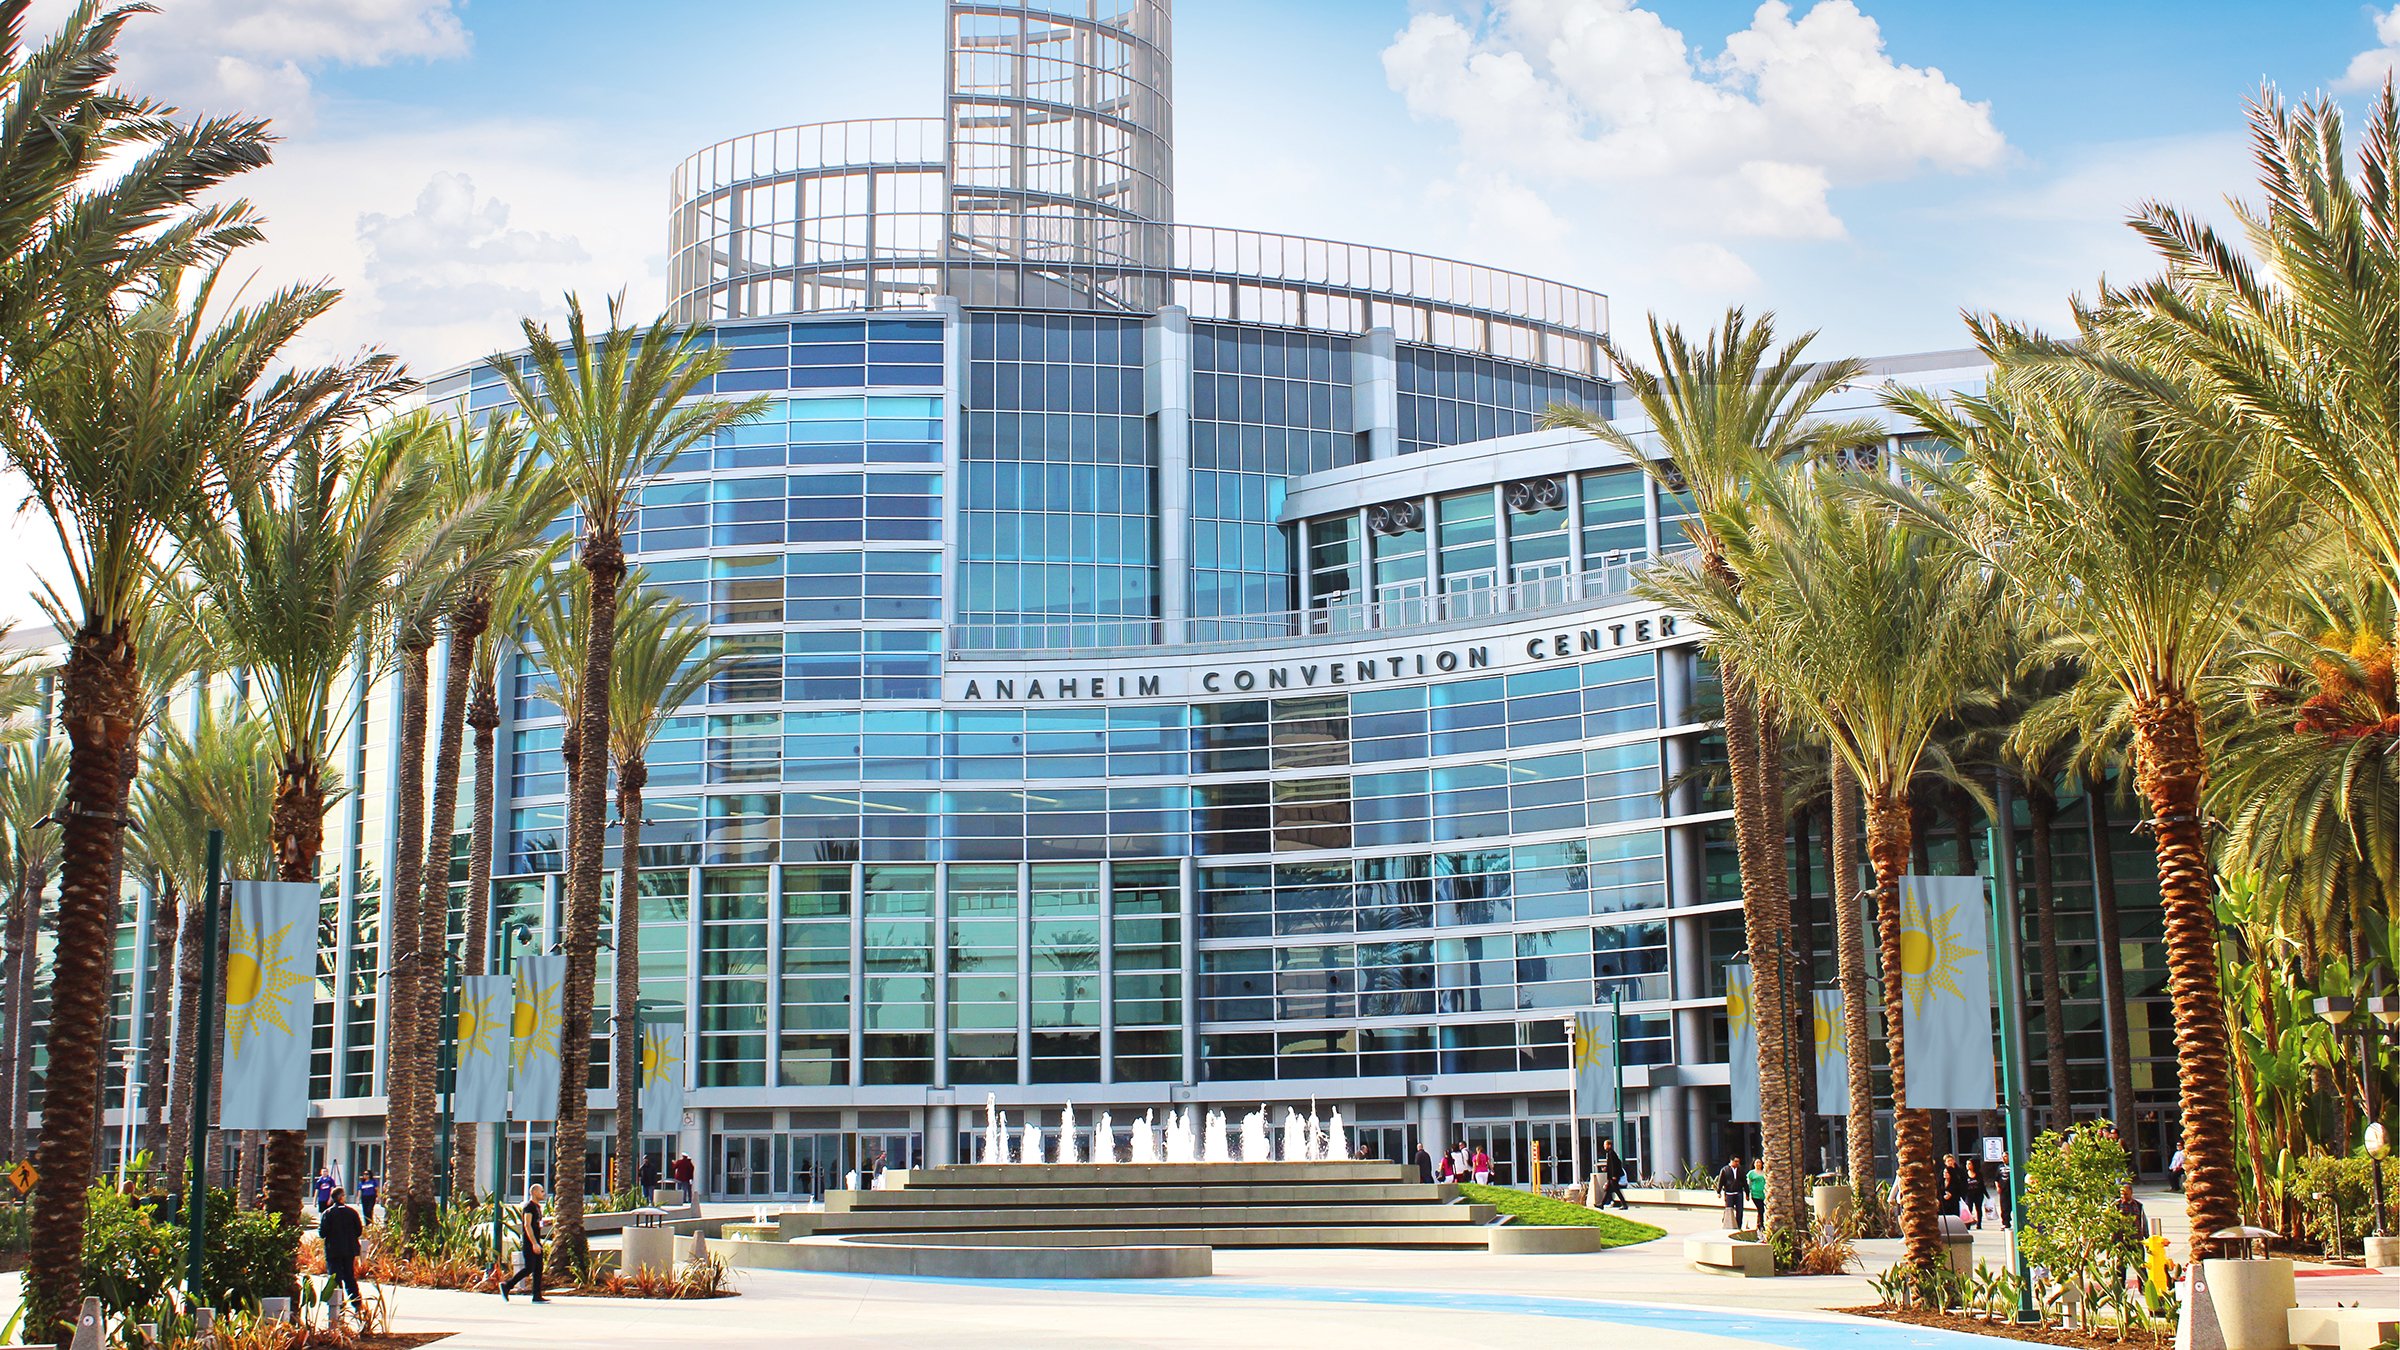 Front entrance of the Anaheim Convention Center, Anaheim, California, USA